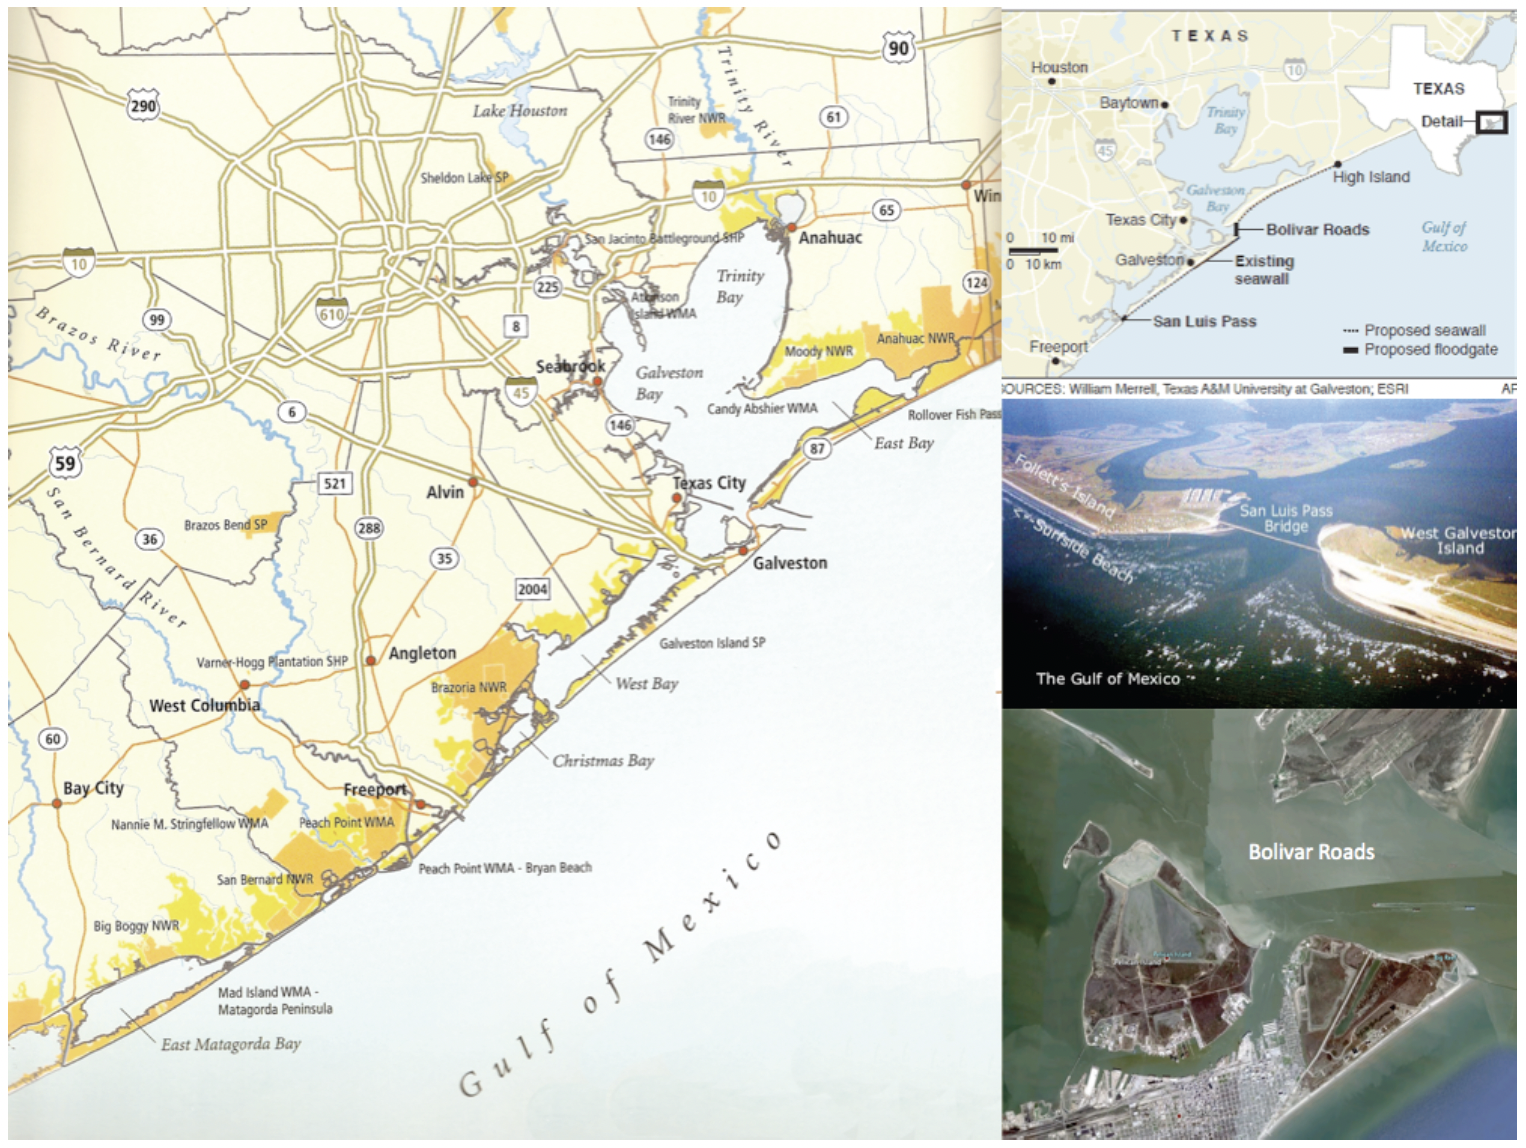 These figures show the location and appearance of barrier islands in the Houston-Galveston coastal area.